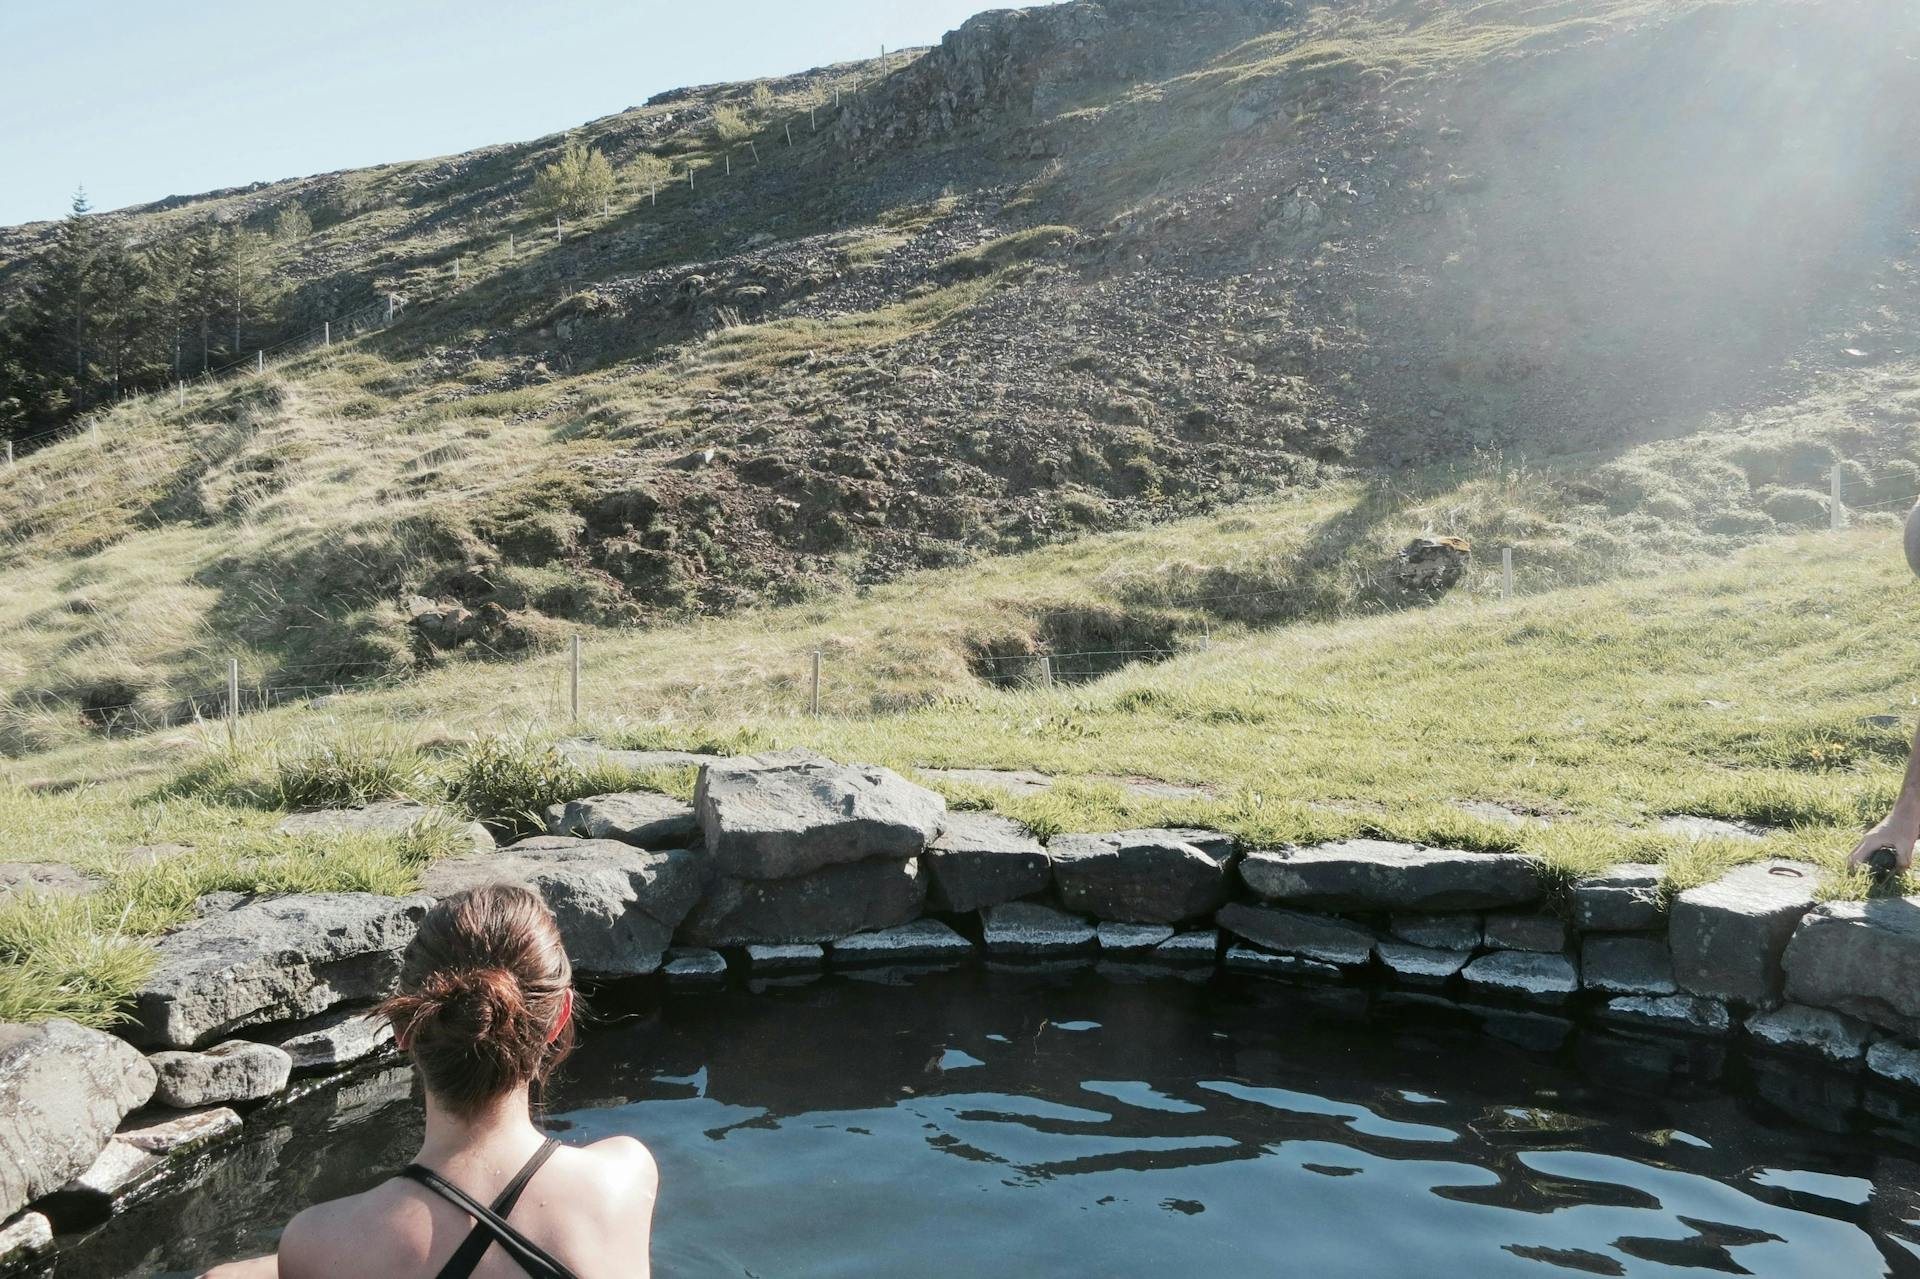 A woman bathing in a geothermal pool. Sun is shining. 